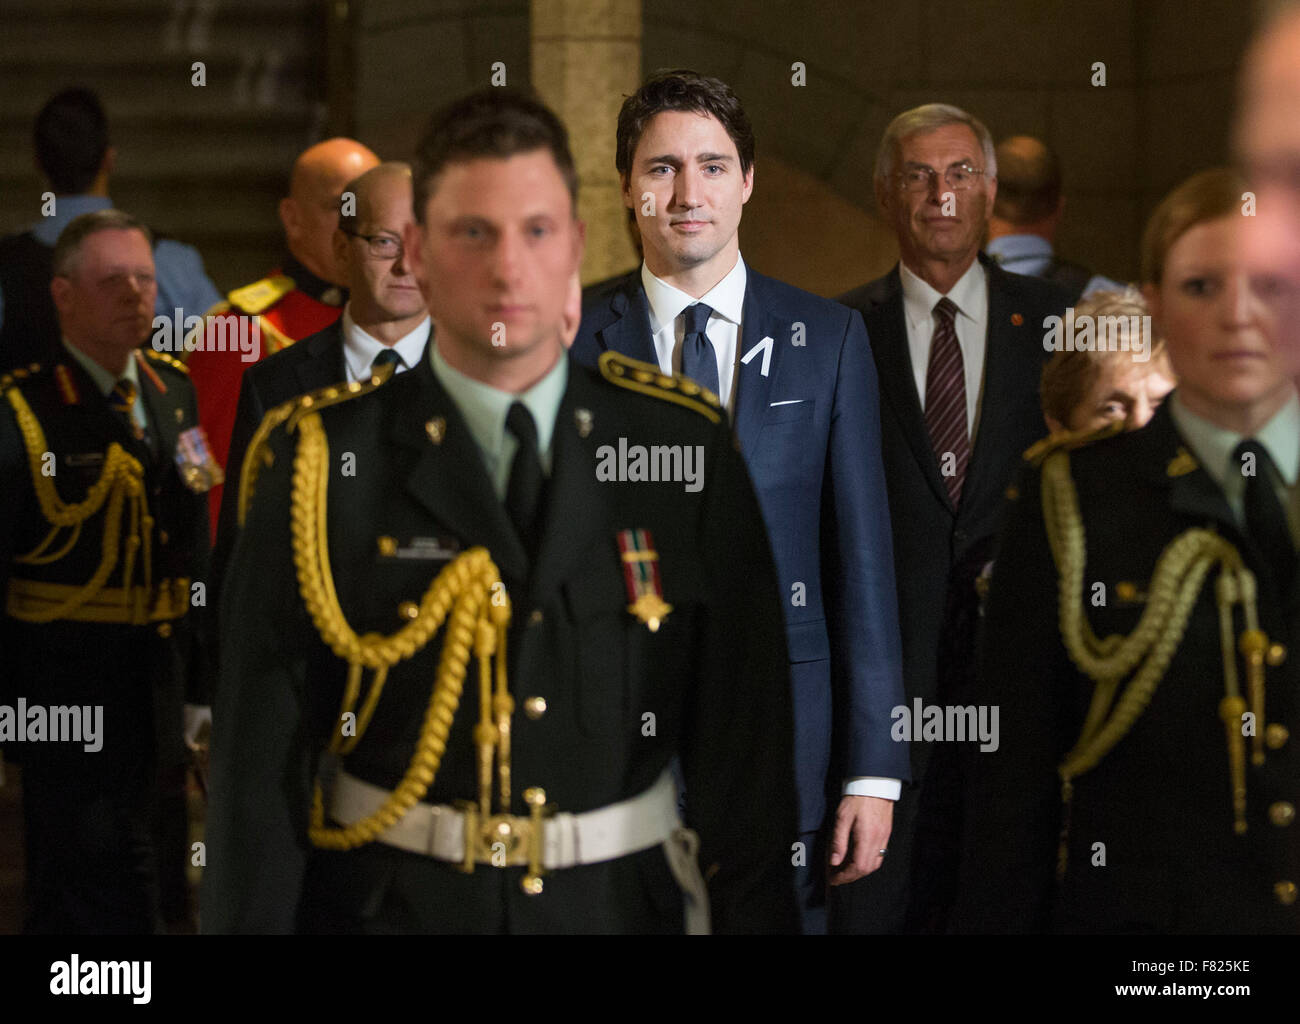 (151204) -- OTTAWA, Dec. 4 (Xinhua) -- Canadian Prime Minister Justin Trudeau arrives to attend the Throne Speech at Parliament Hill in Ottawa, Canada, Dec. 4, 2015. The Throne Speech that was held on Friday marked the opening of the First Session of 42nd Parliament of Canada. (Xinhua/Chris Roussakis) Stock Photo